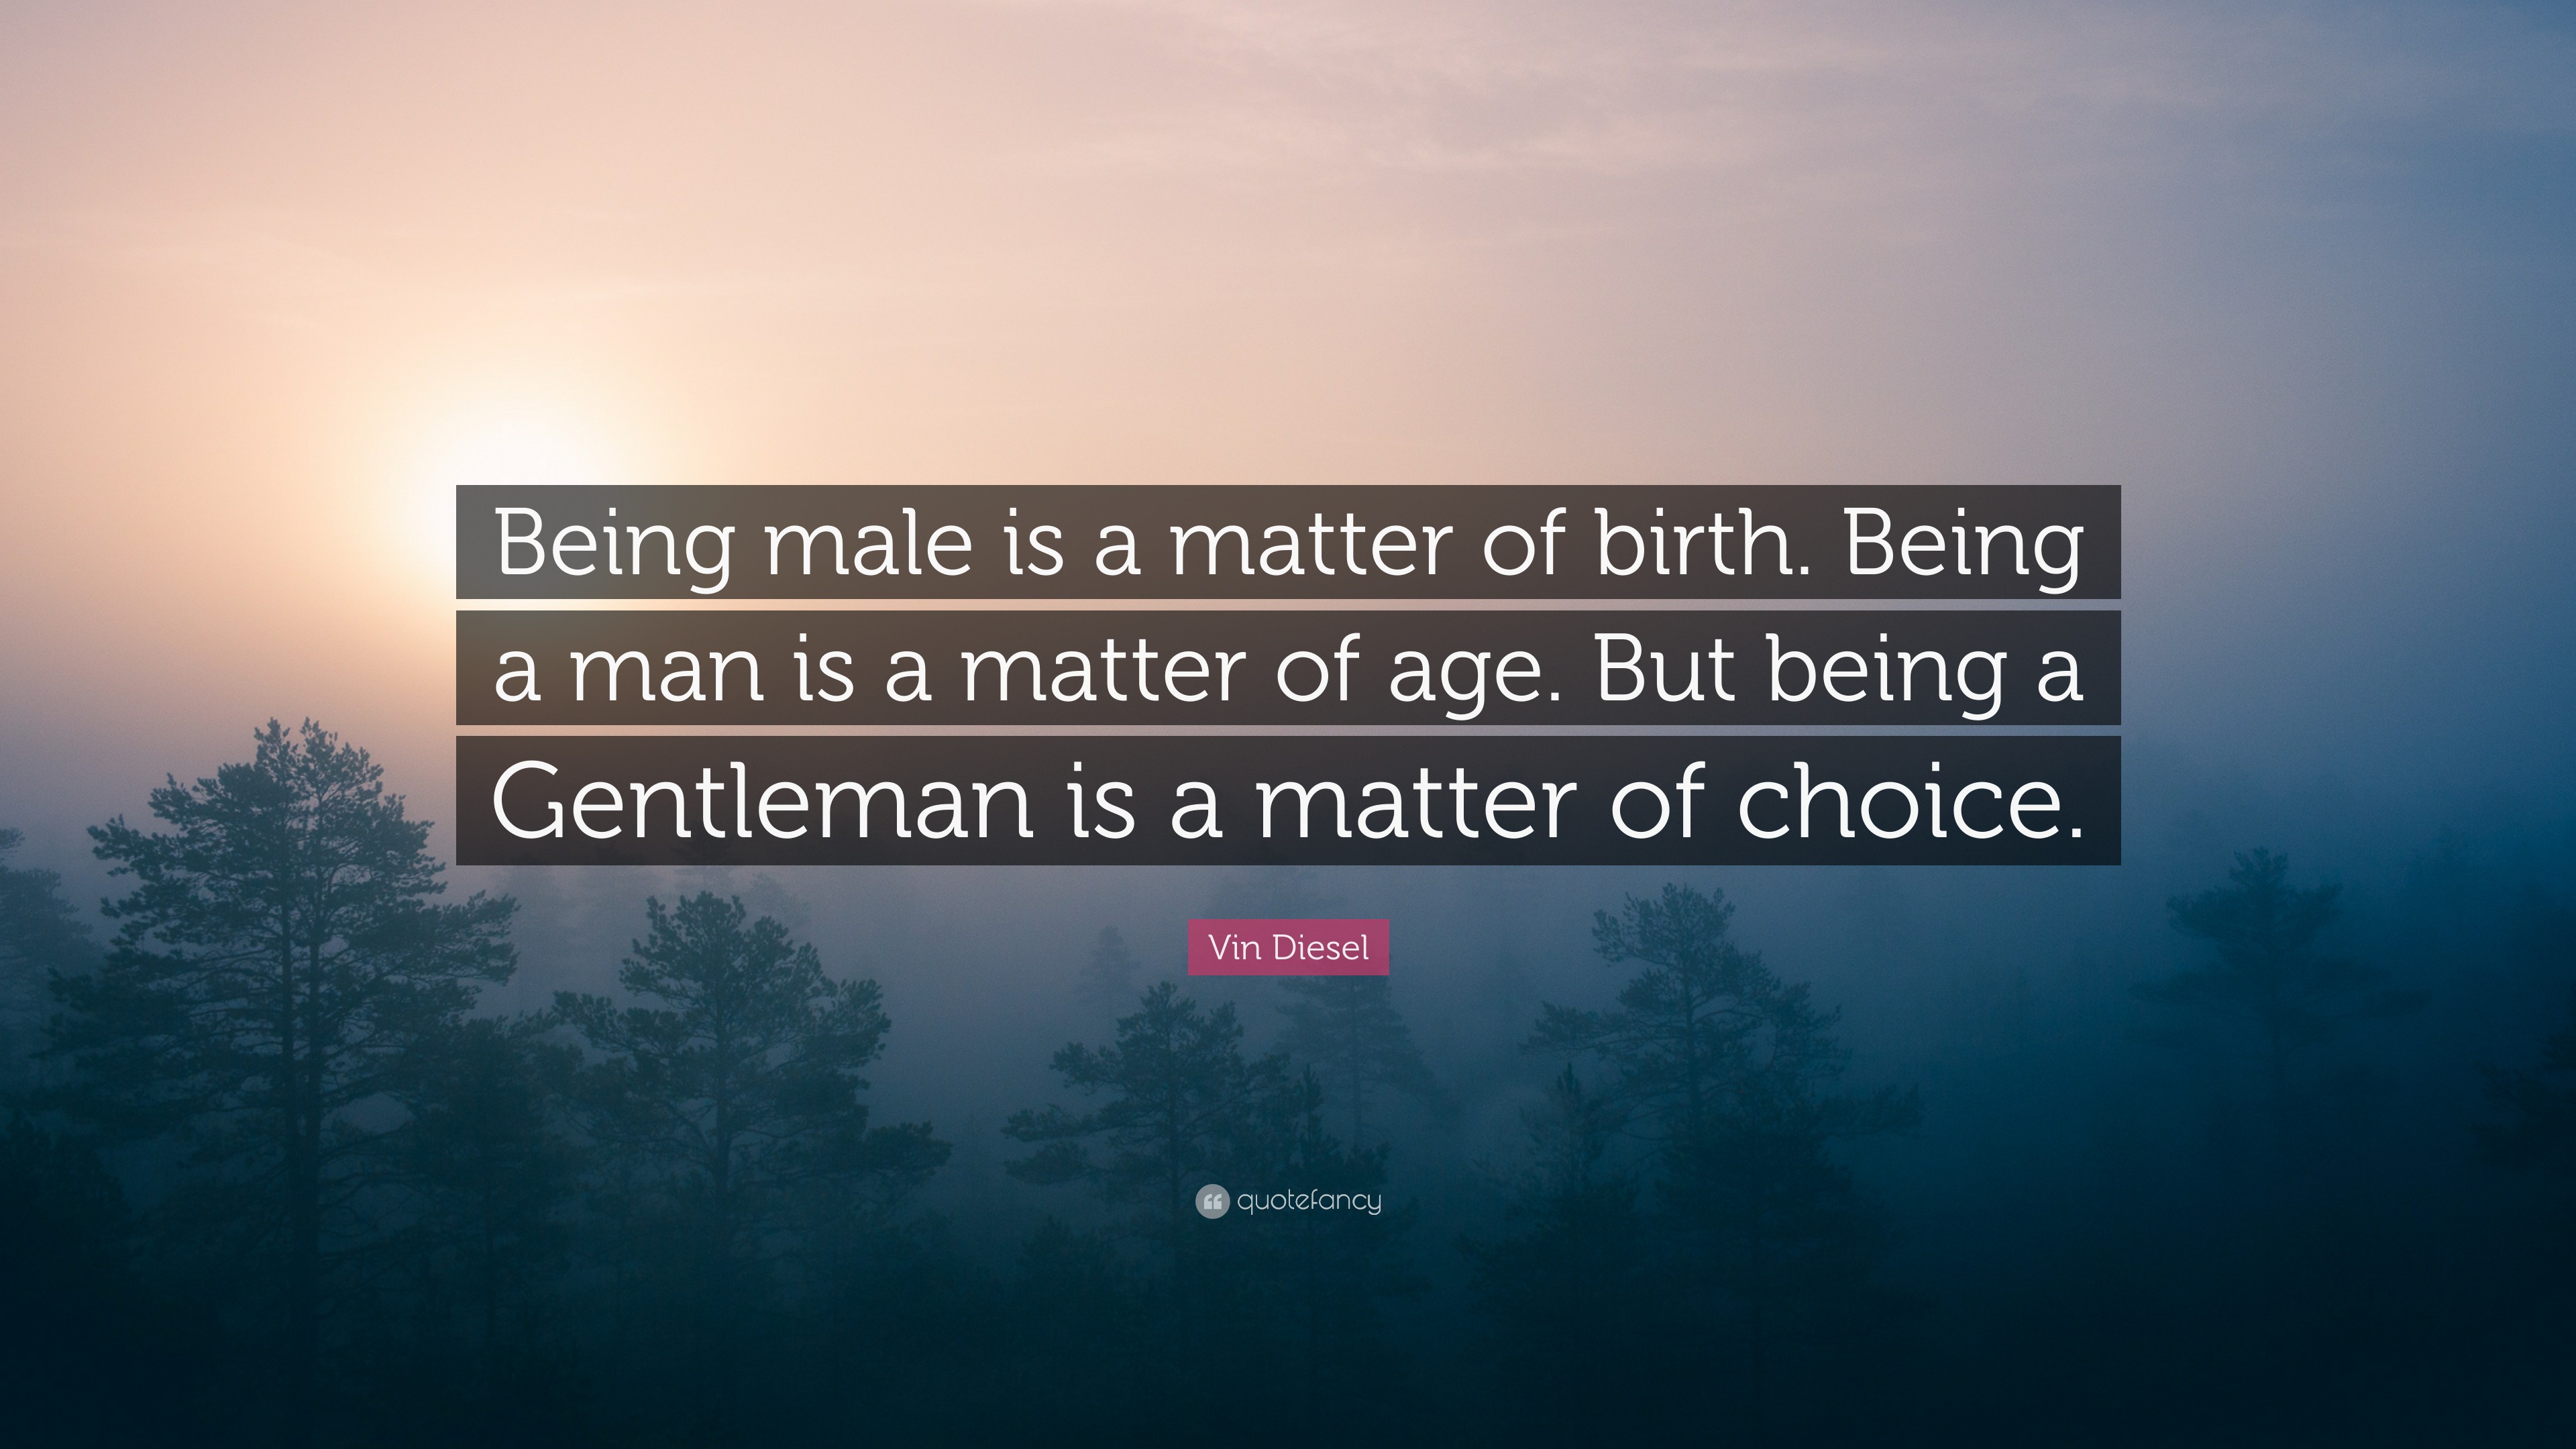 Vin Diesel Quote: “Being male is a matter of birth. Being a man is a